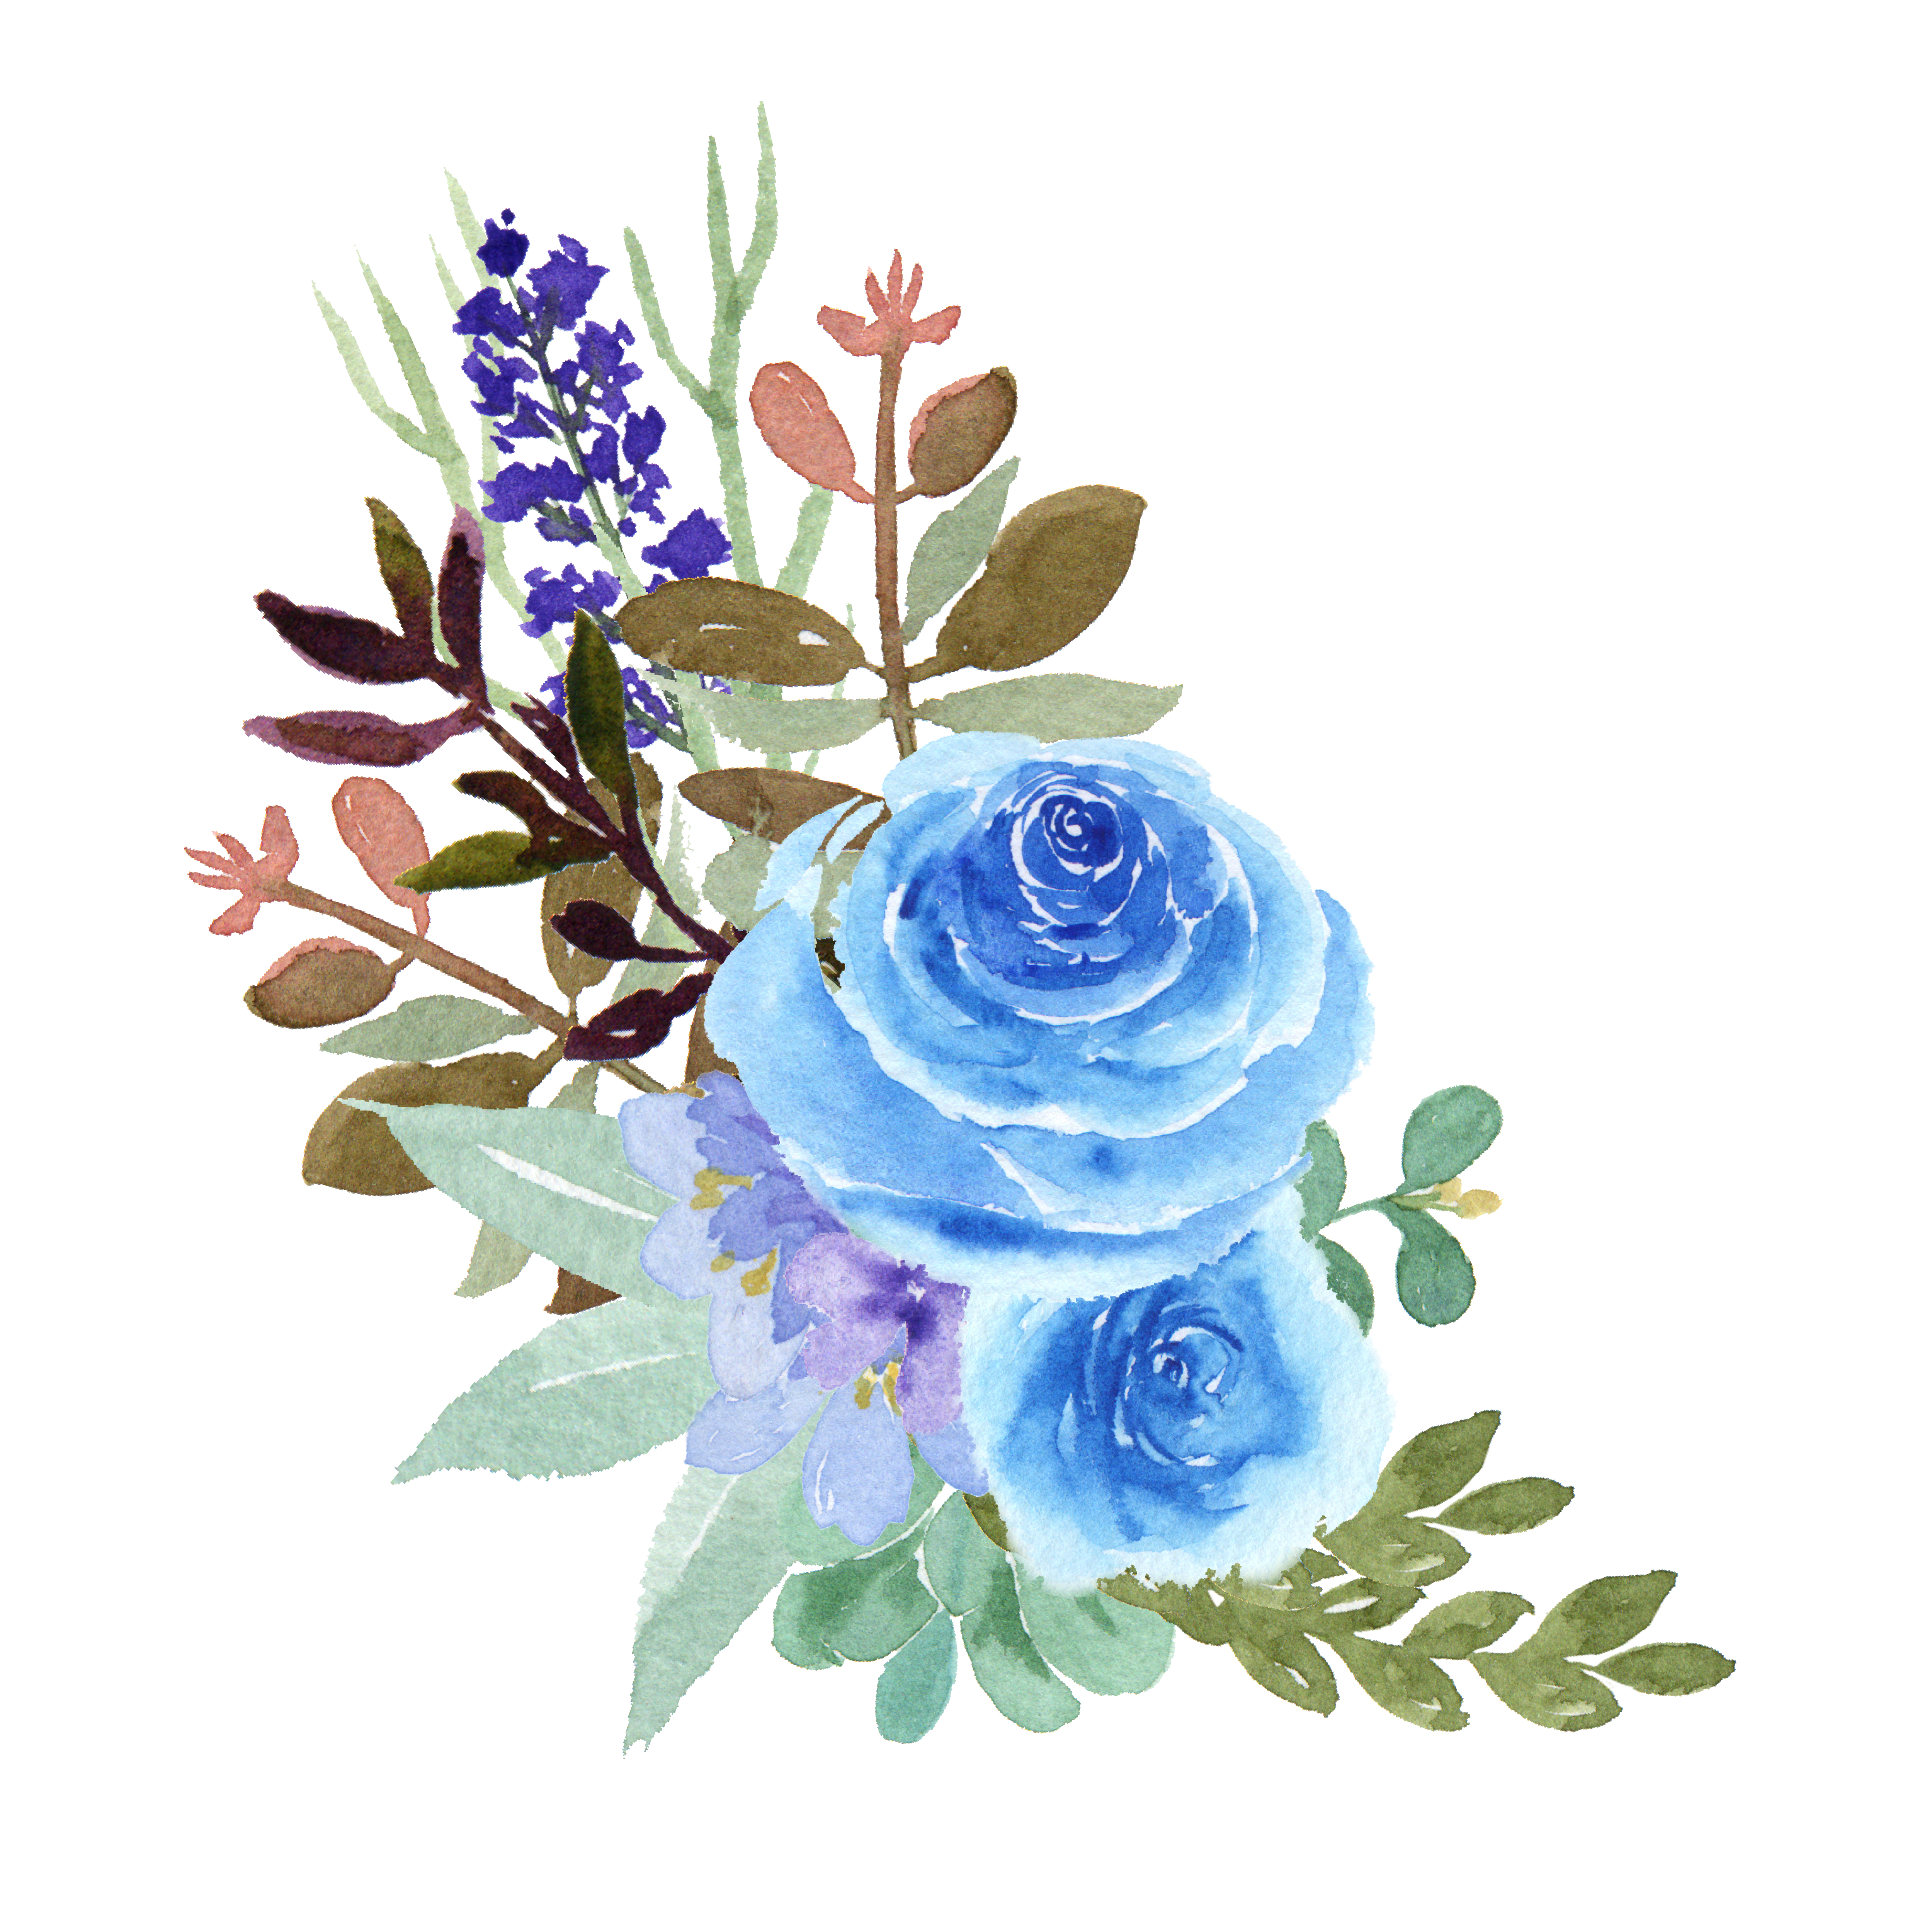 Watercolor bouquets florals hand painted lush flowers llustration